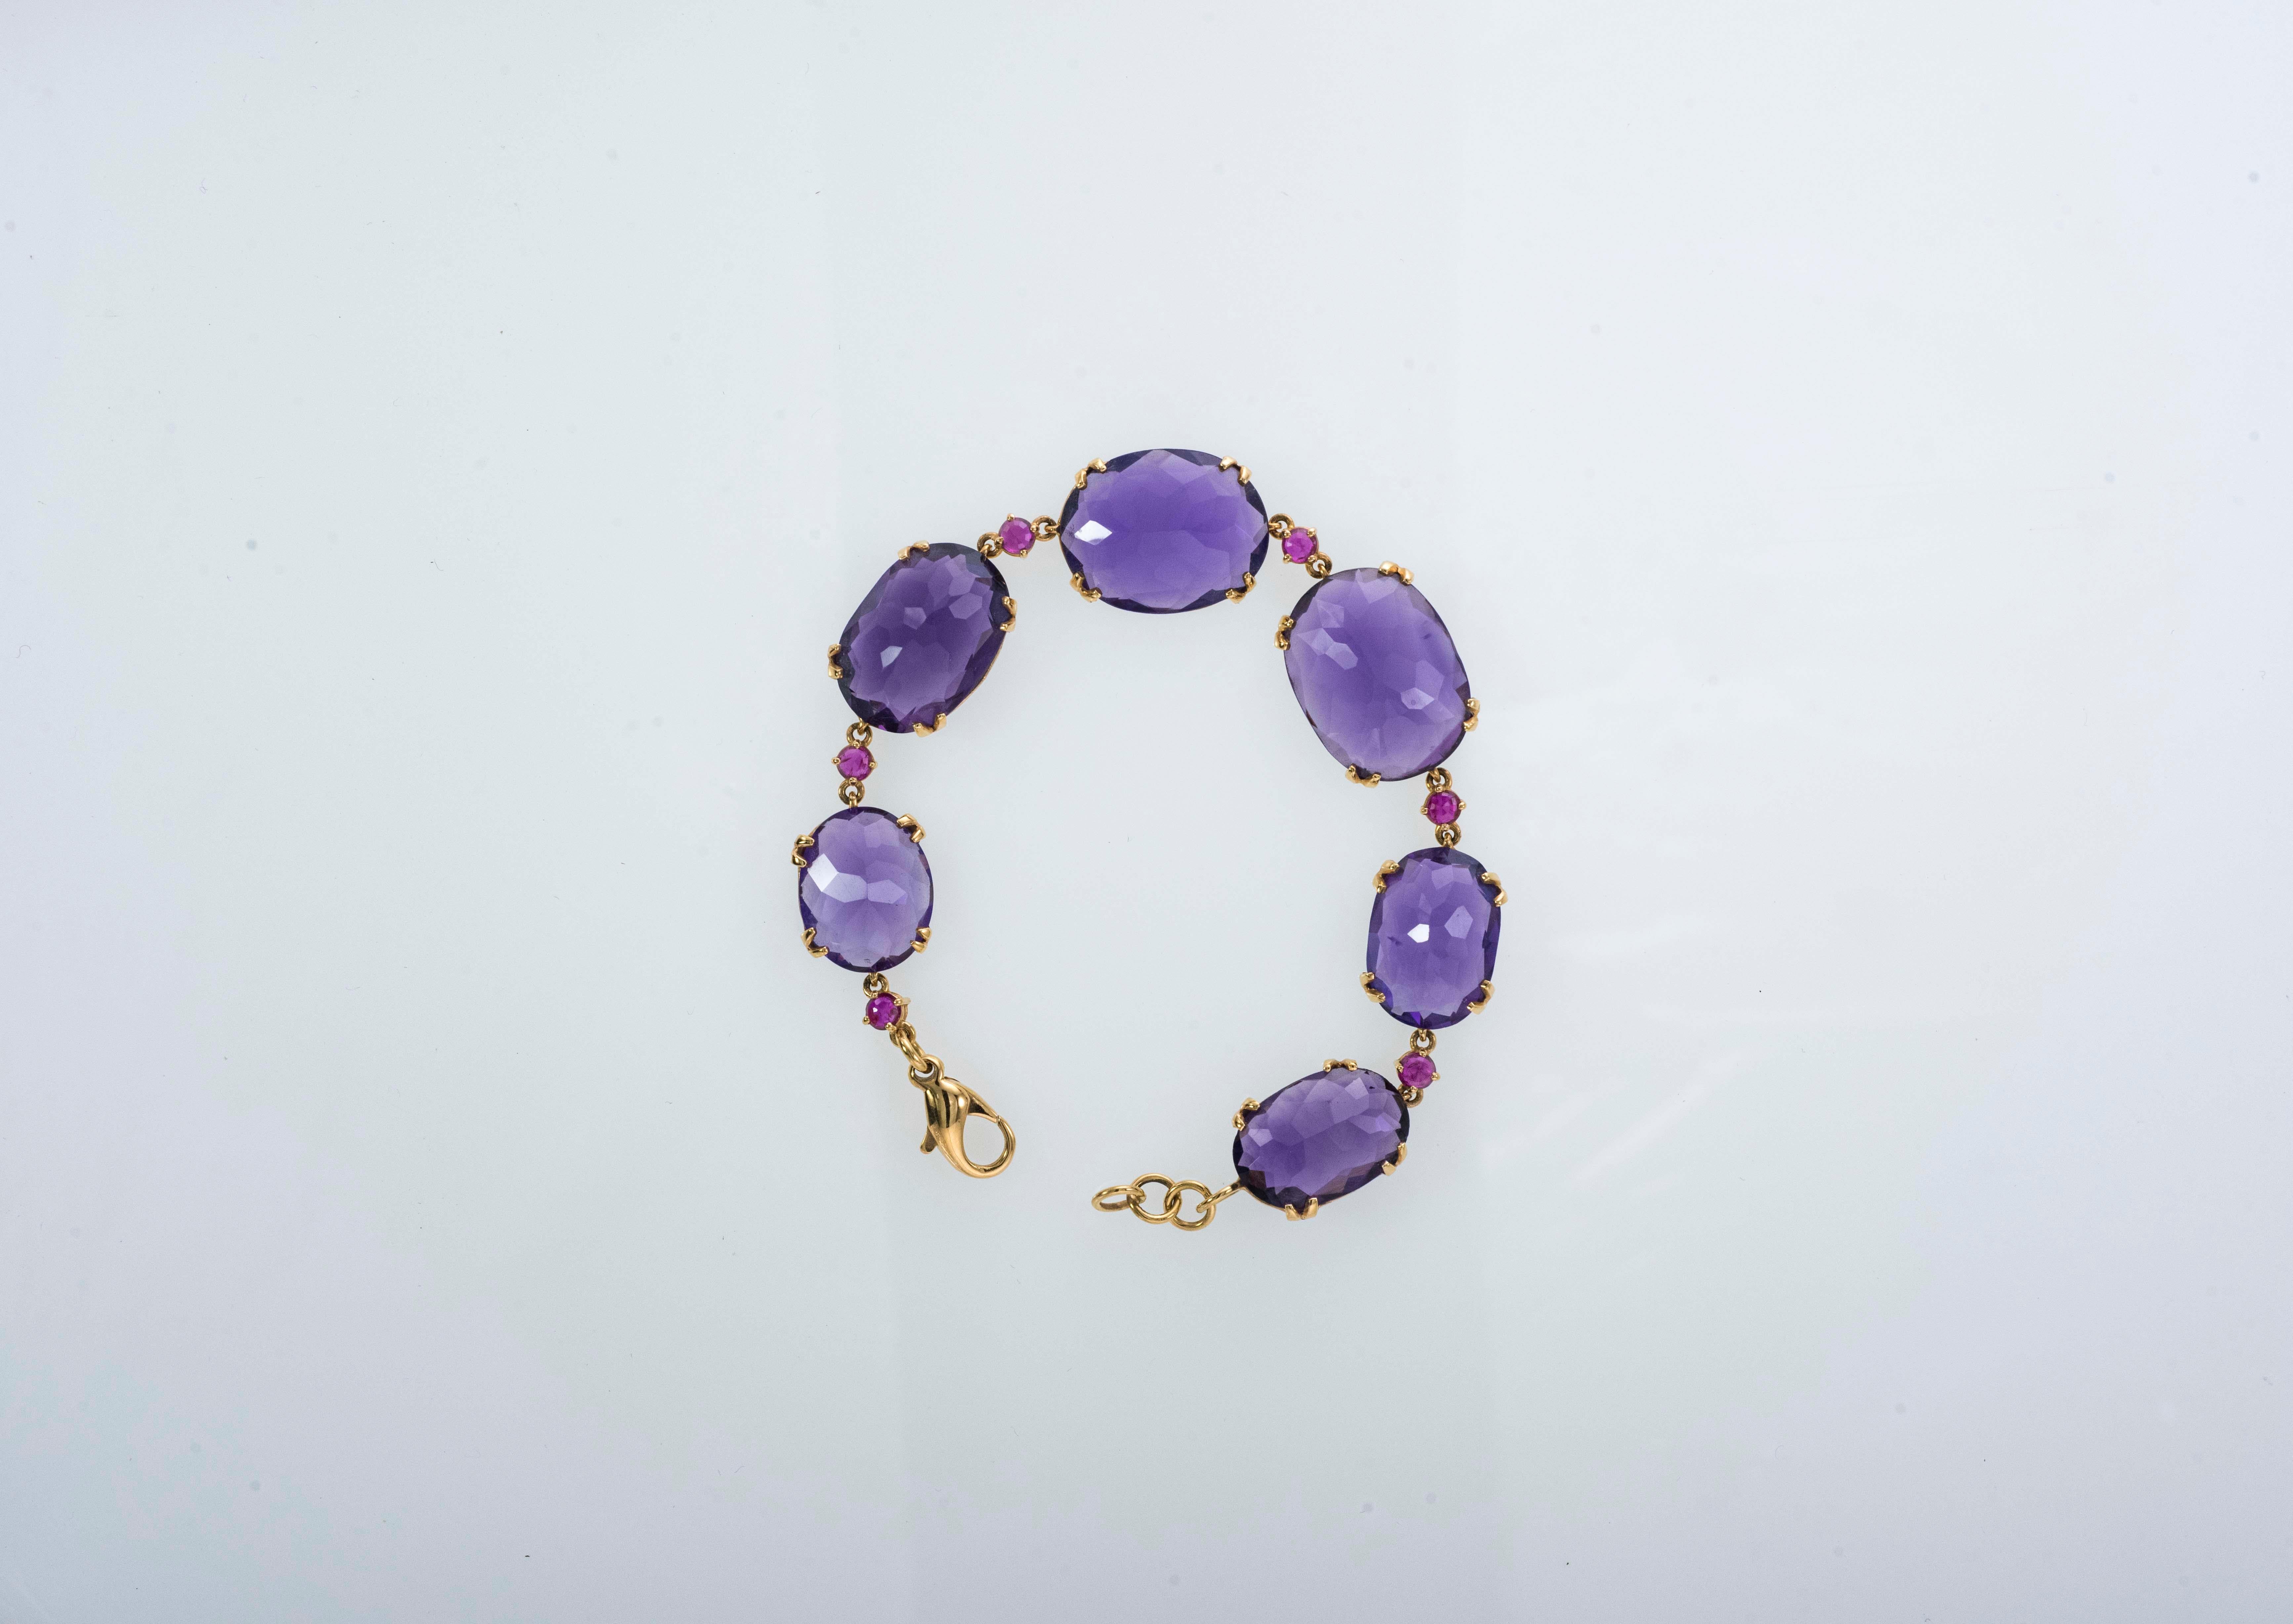 Purple Quartz faceted flat bracelet in 18 Kt rose gold and round brilliant cut Rubies.
Completely handmade in Italy.
All the stones has different shapes from each other and a very intense deep purple color. 
Embellished with six round brilliant cut